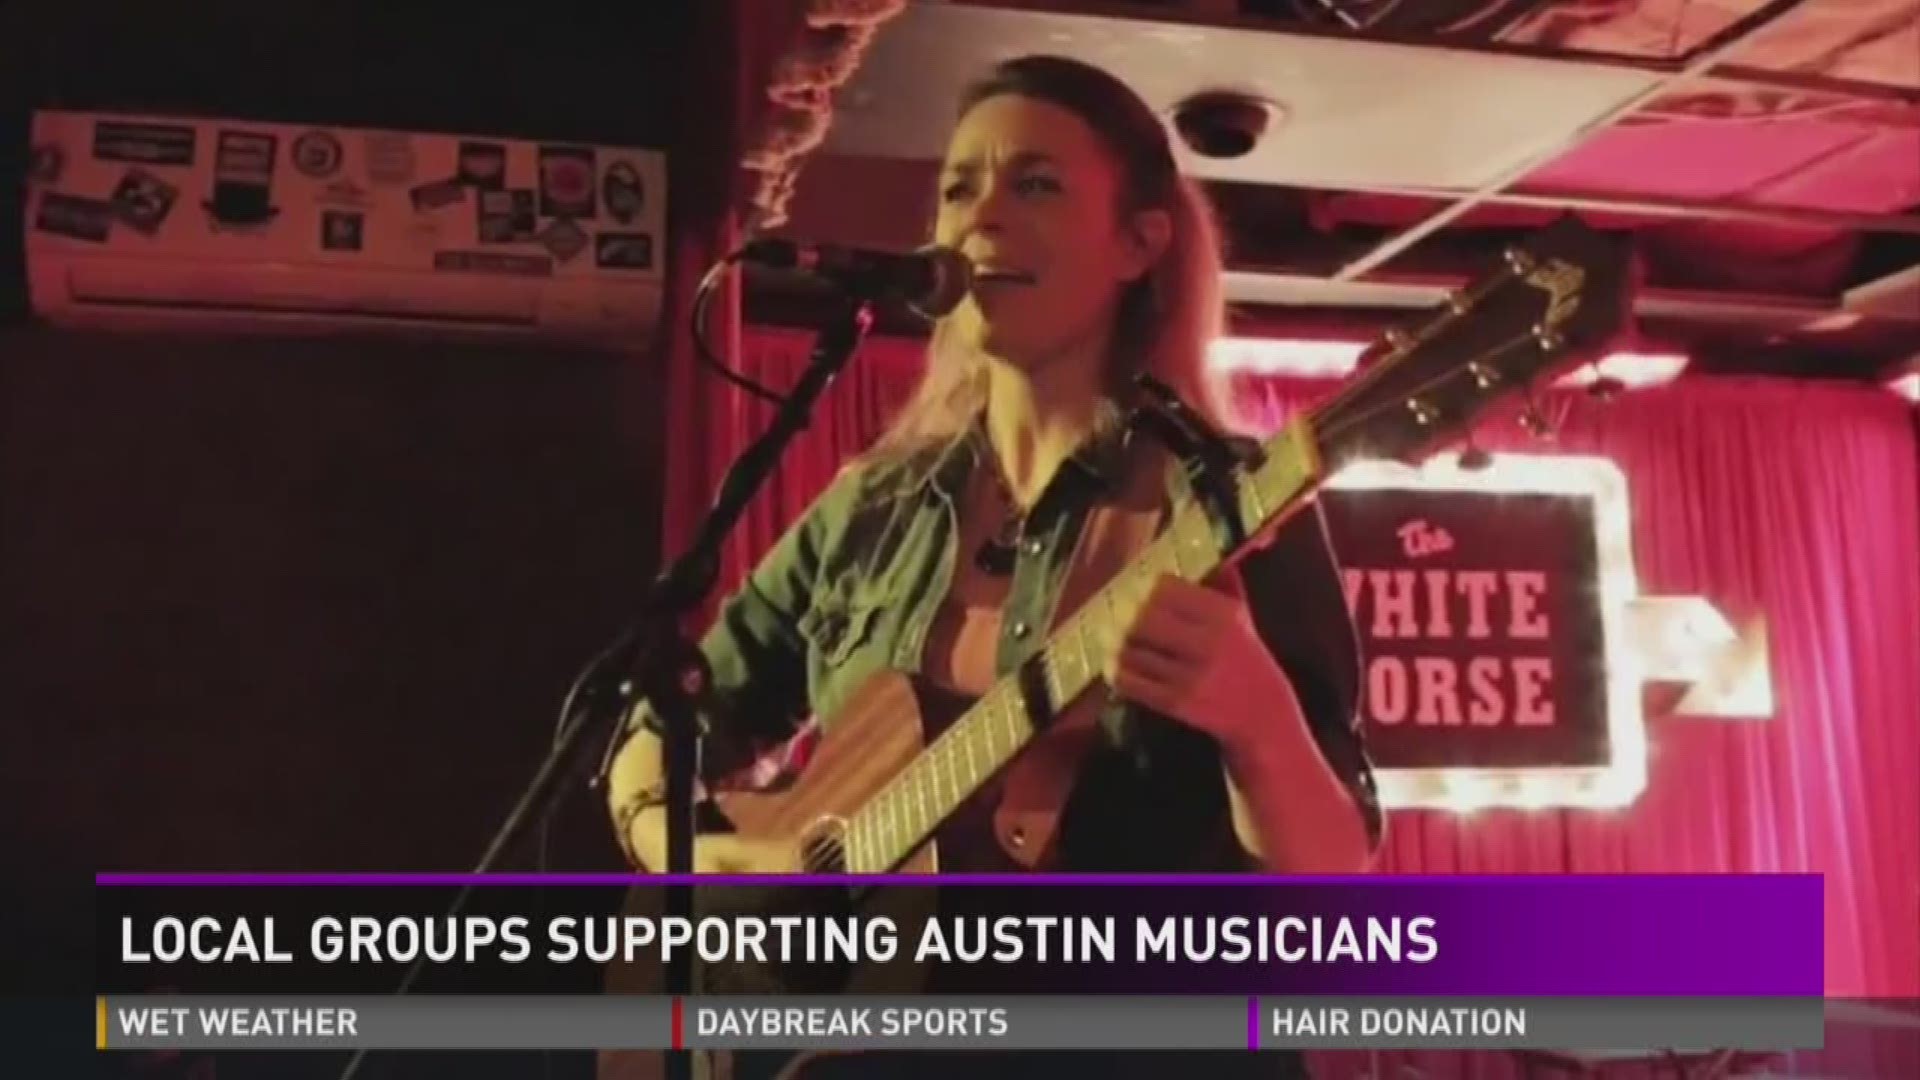 The Health Alliance for Austin Musicians (HAAM) is a local nonprofit that provides access to affordable health care for Austin's working musicians.